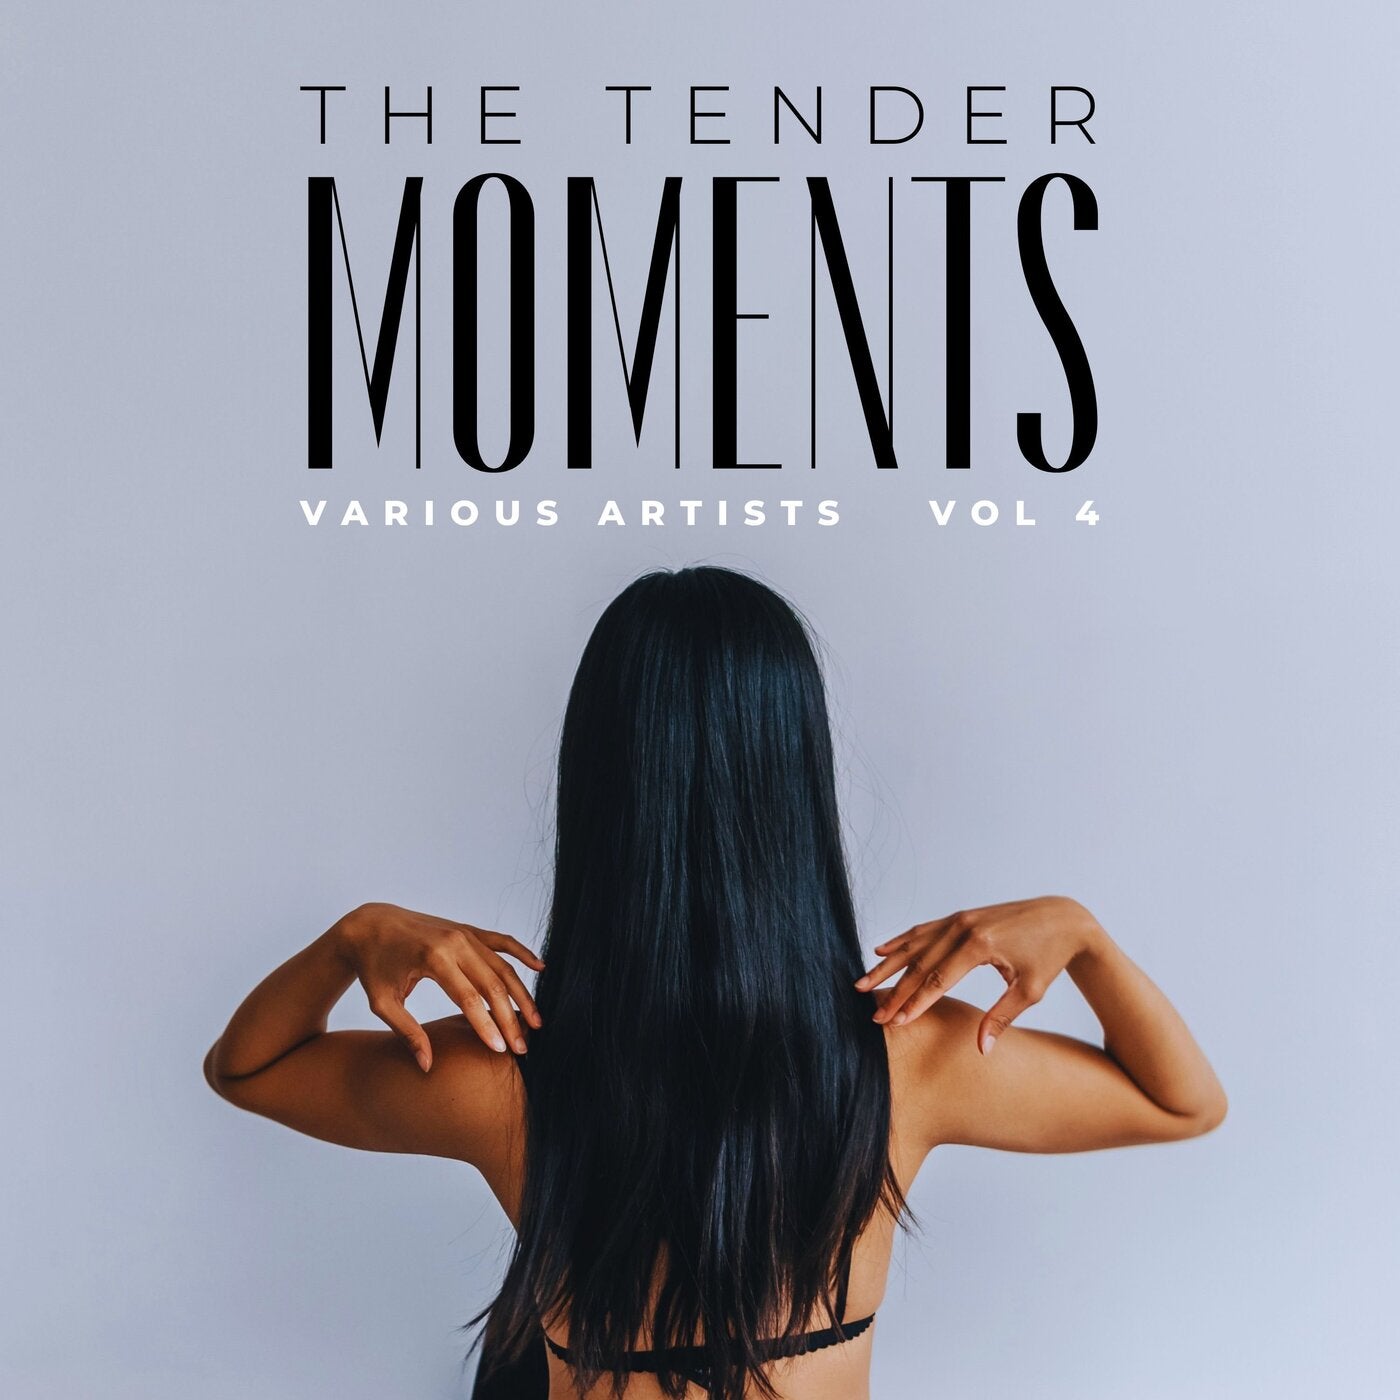 The Tender Moments, Vol. 4